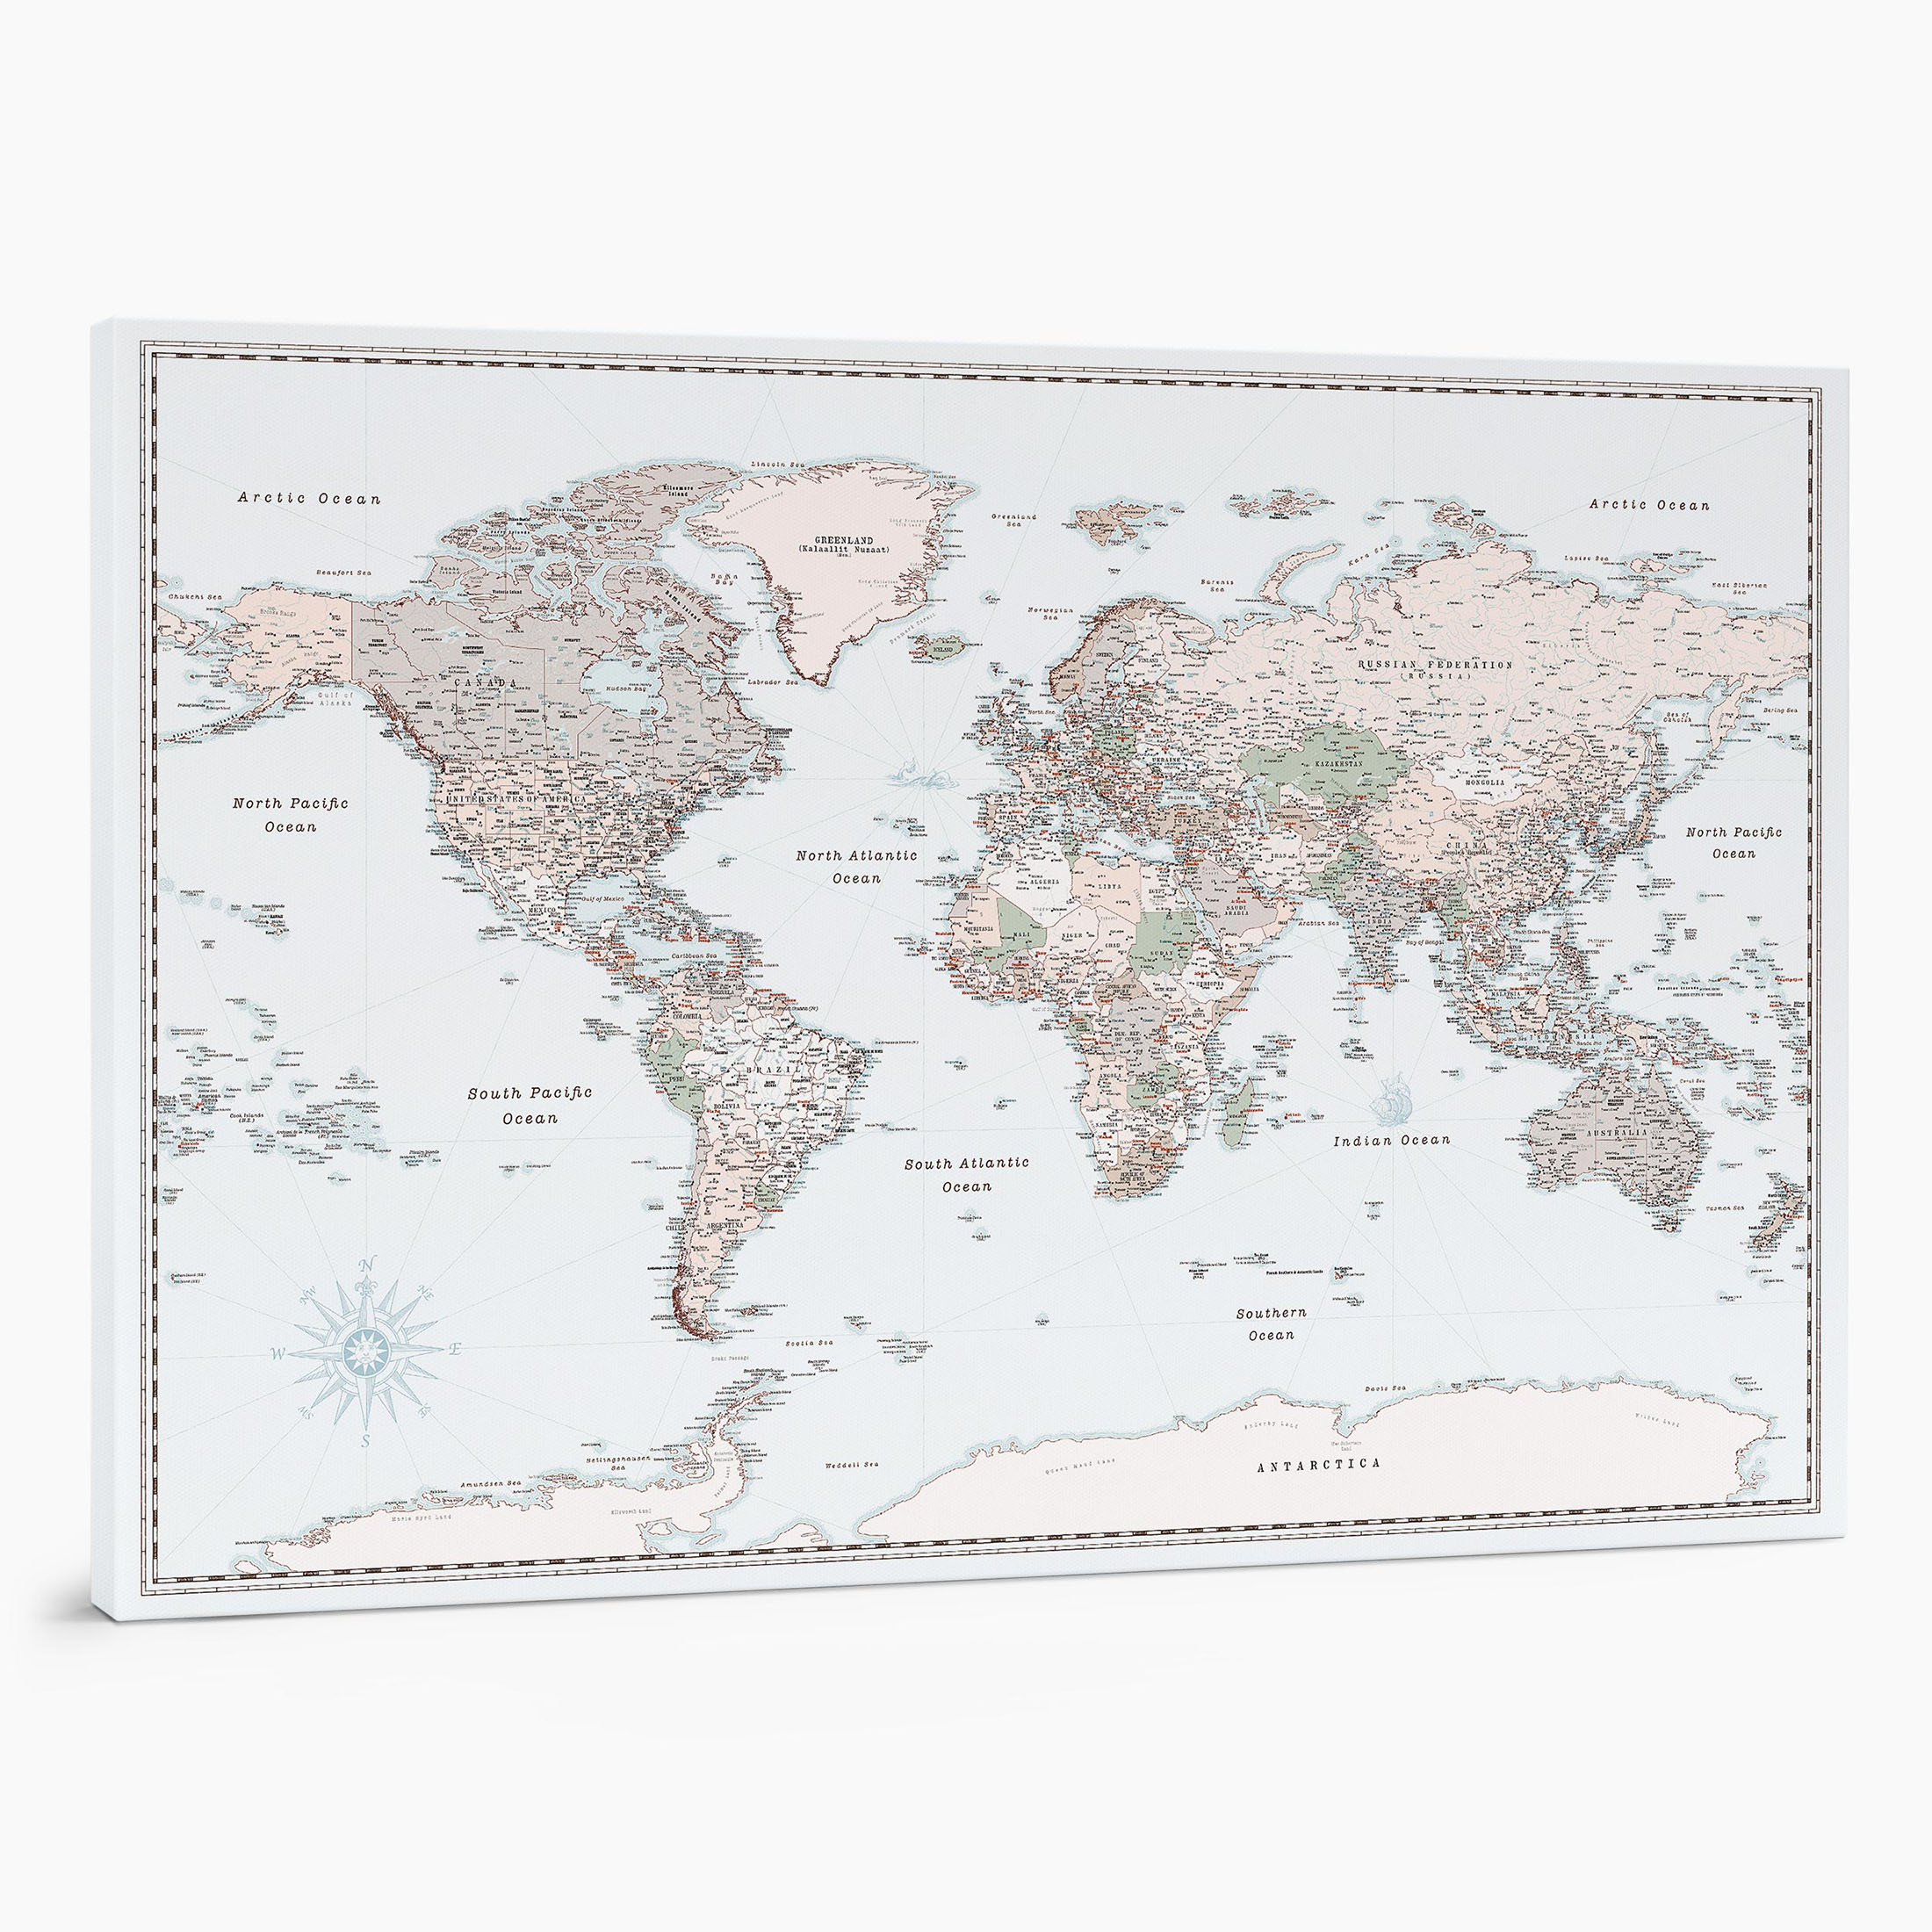 18P large push pin world map to track places visited on canvas retro